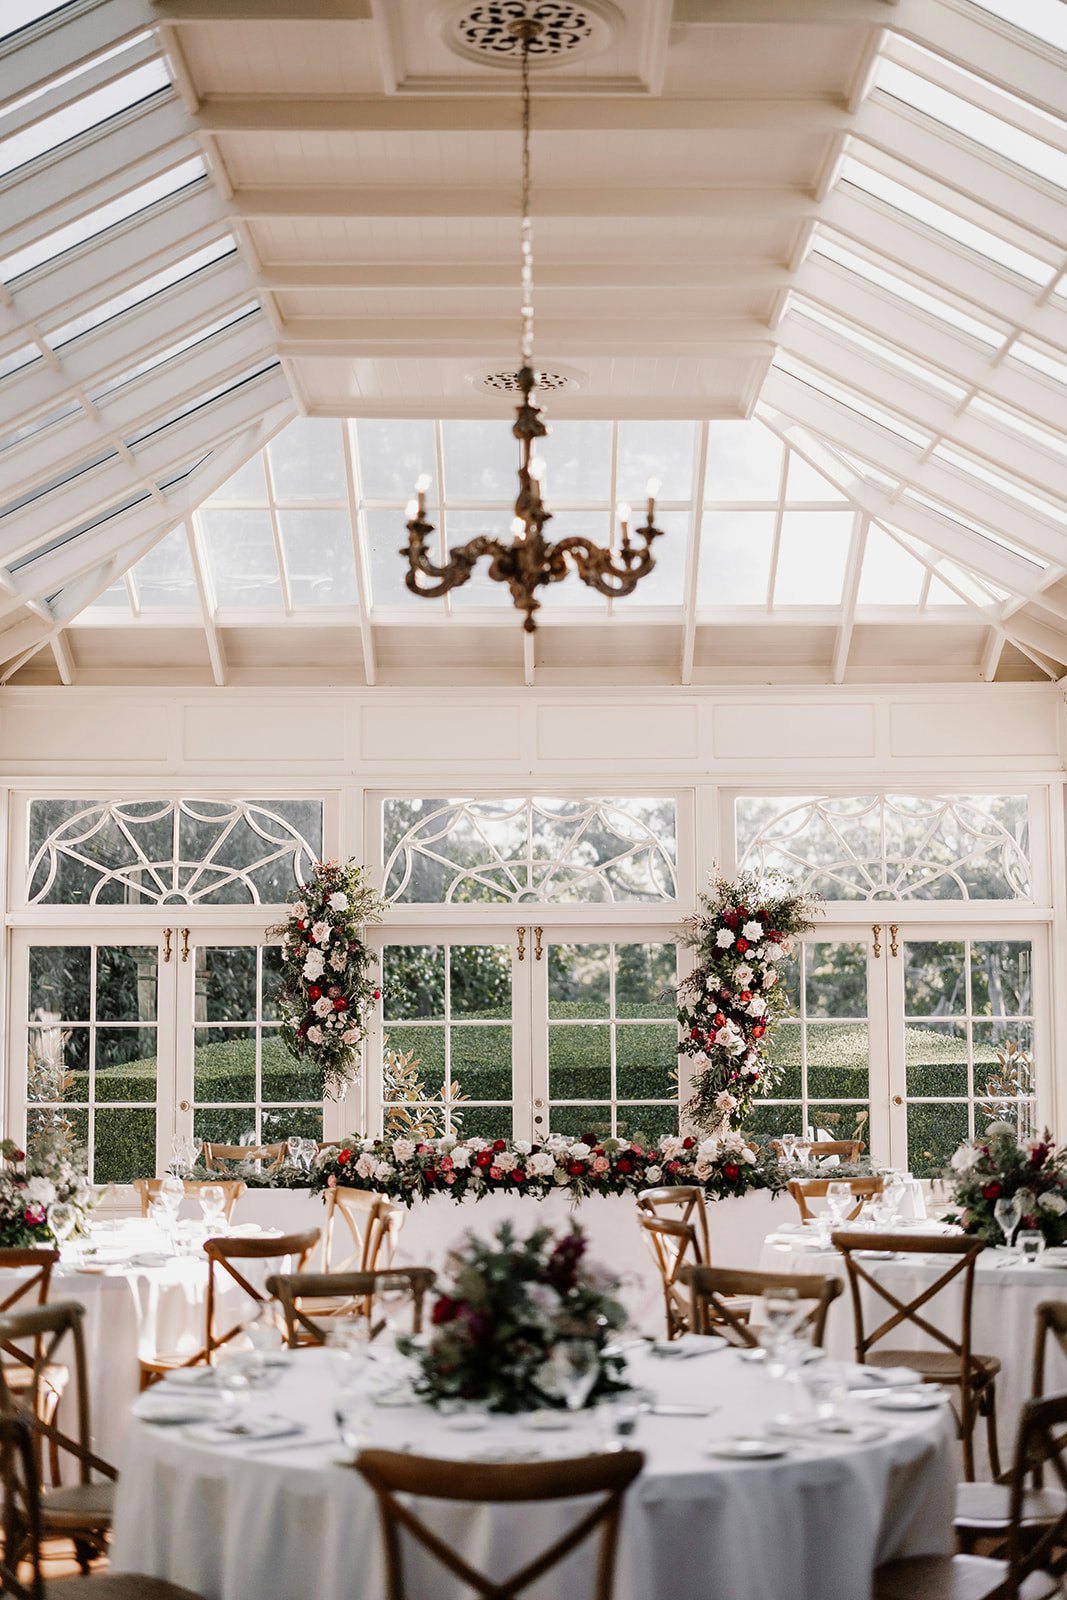 Wedding reception with round tables and flowers